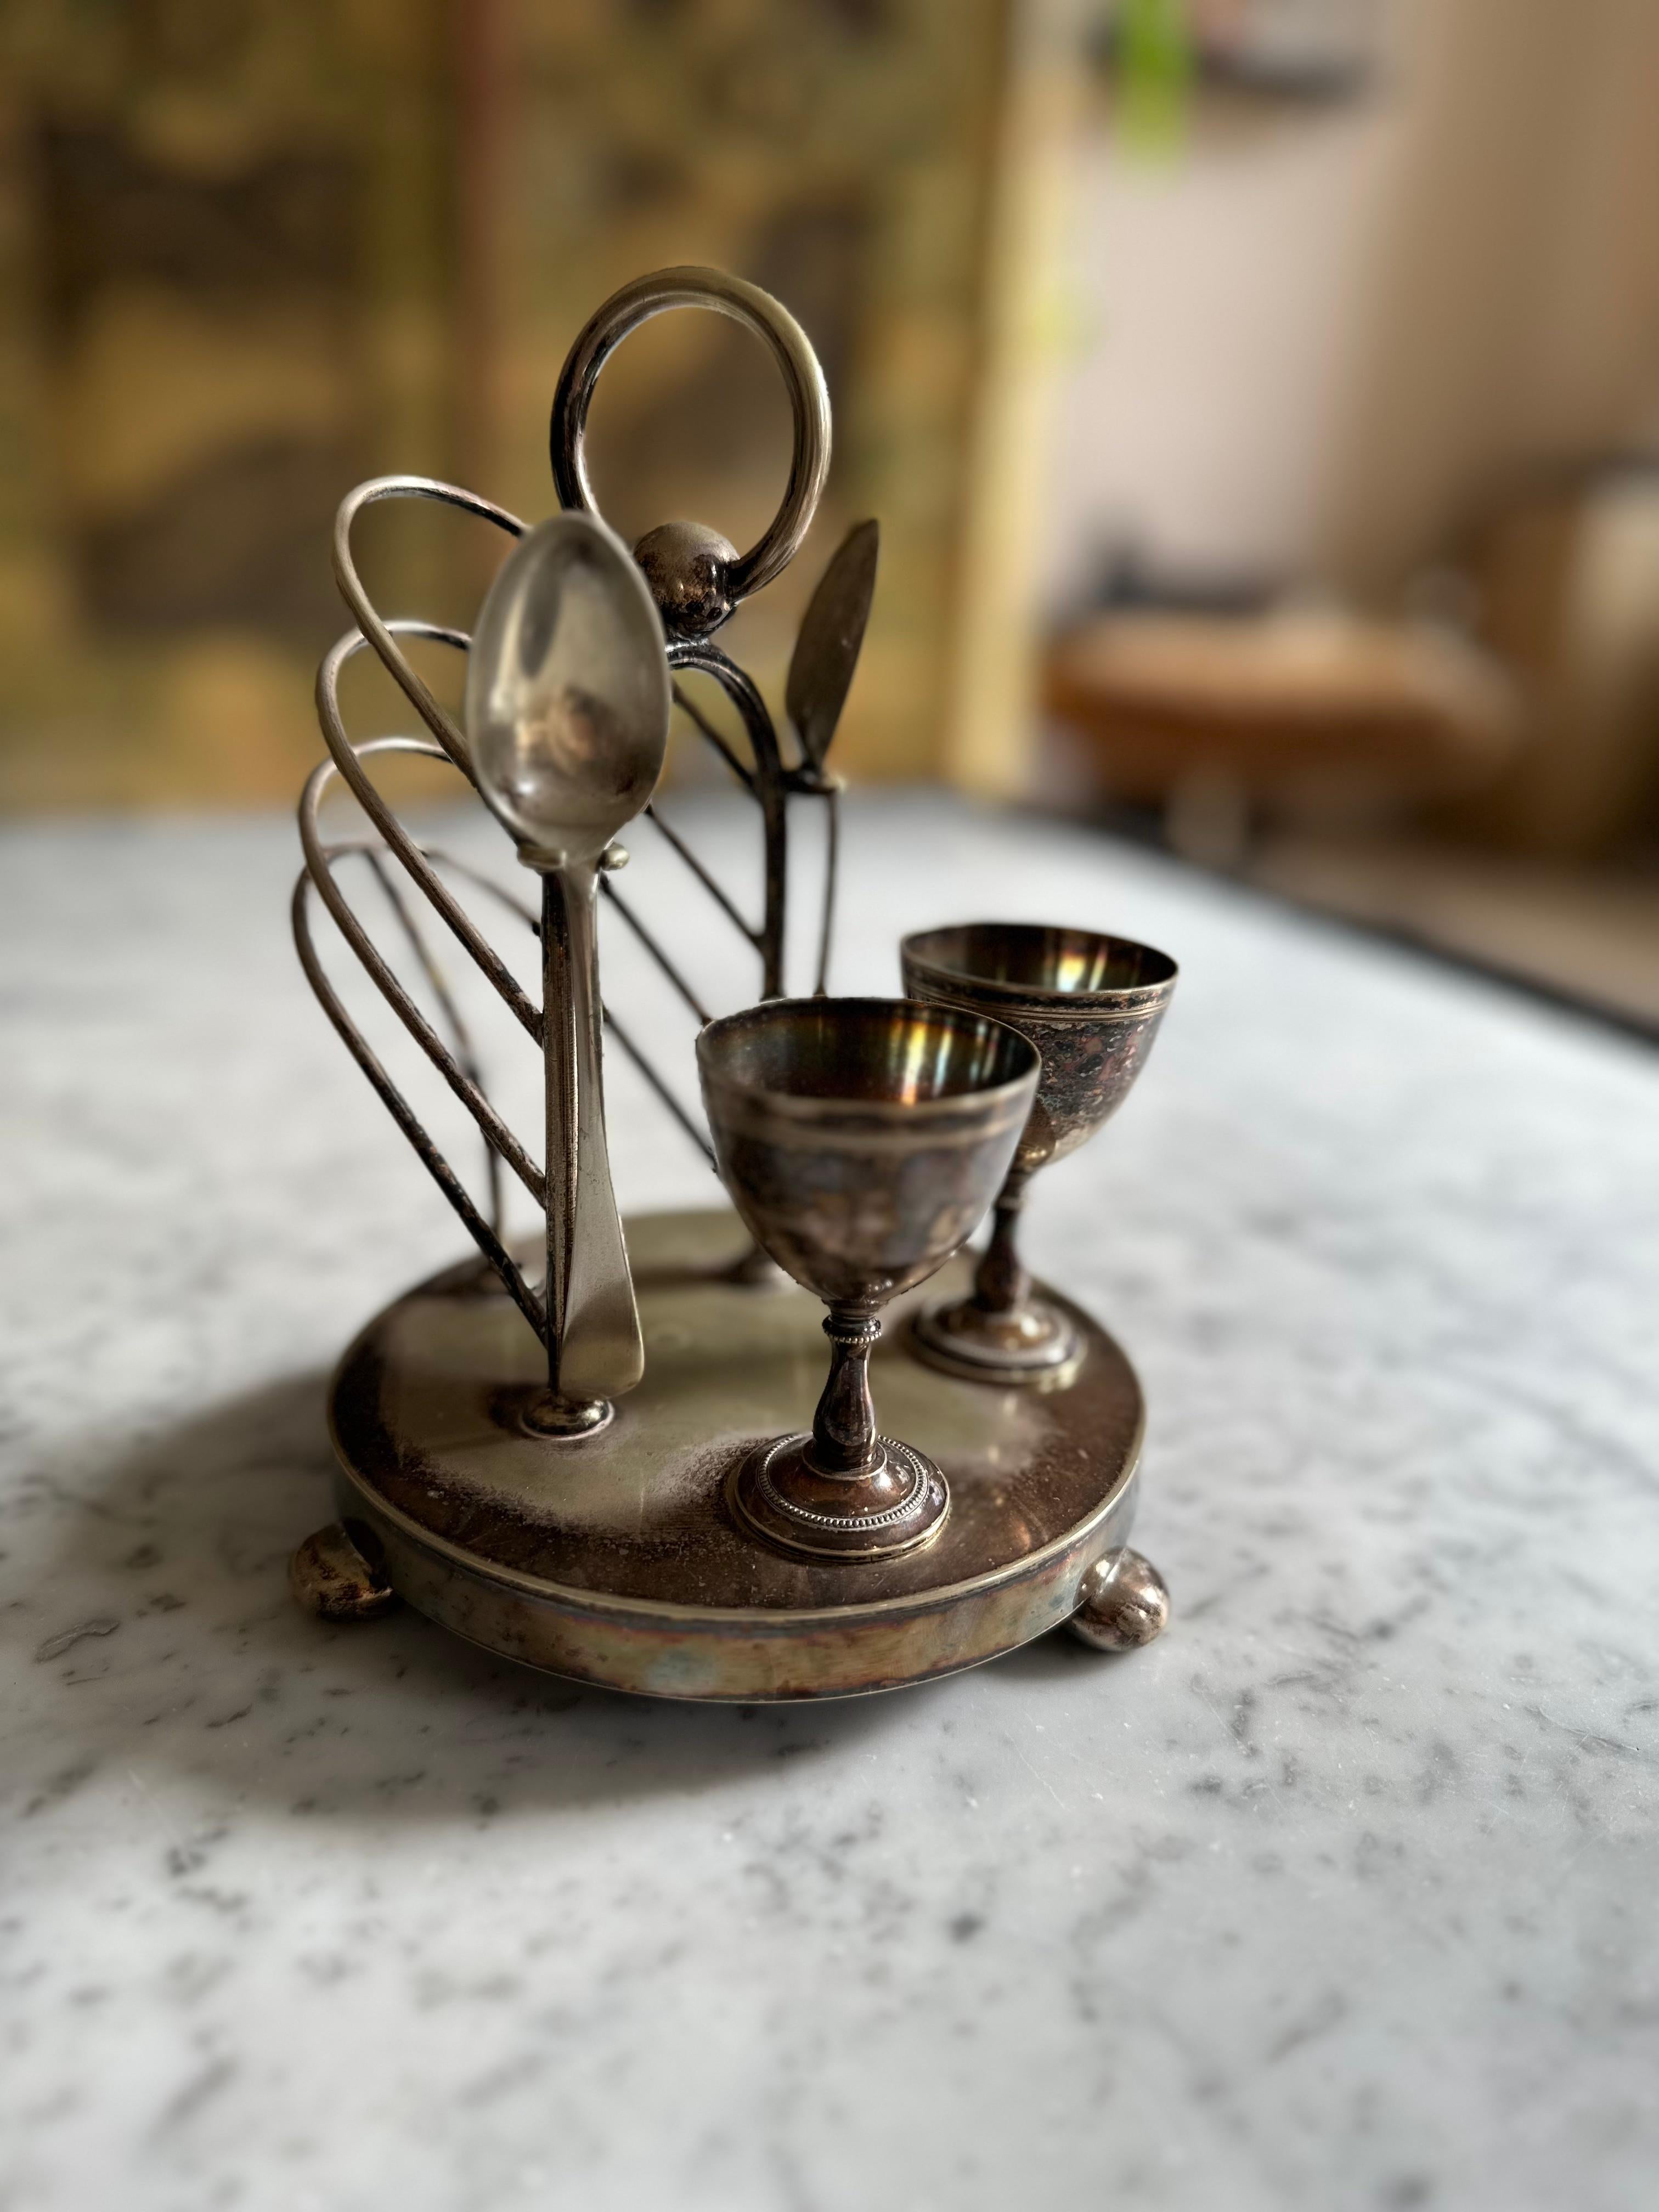 Introducing our charming Breakfast Caddy with Egg Cups, a delightful relic from the early 20th century that adds a touch of vintage elegance to your morning routine. This unique menagerie combines both functionality and aesthetics in one captivating